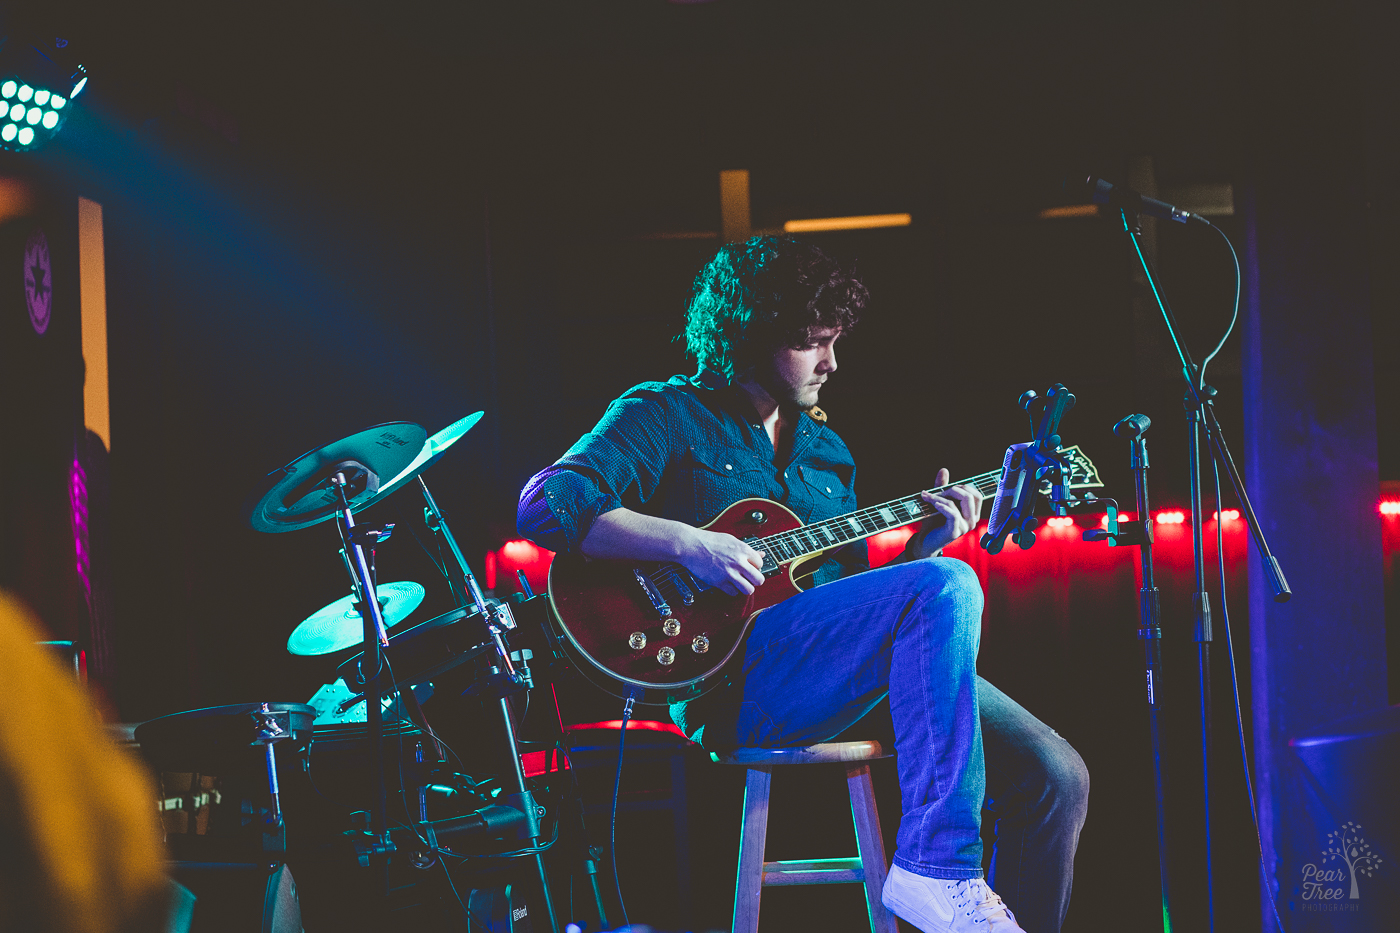 Hunter Rose sitting on a stool on stage and playing an electric guitar